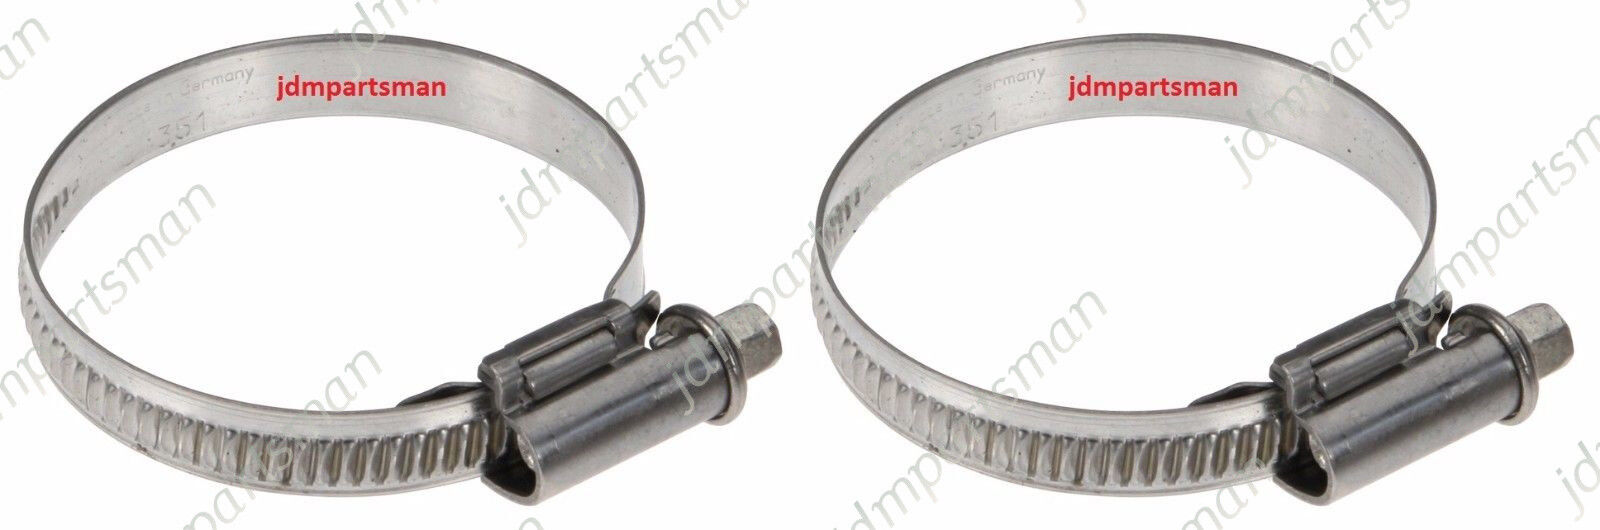 Narrow Band 9mm Steel Hose Clamp 40-60mm - Pack of 2  Made in Germany HC40-60/9